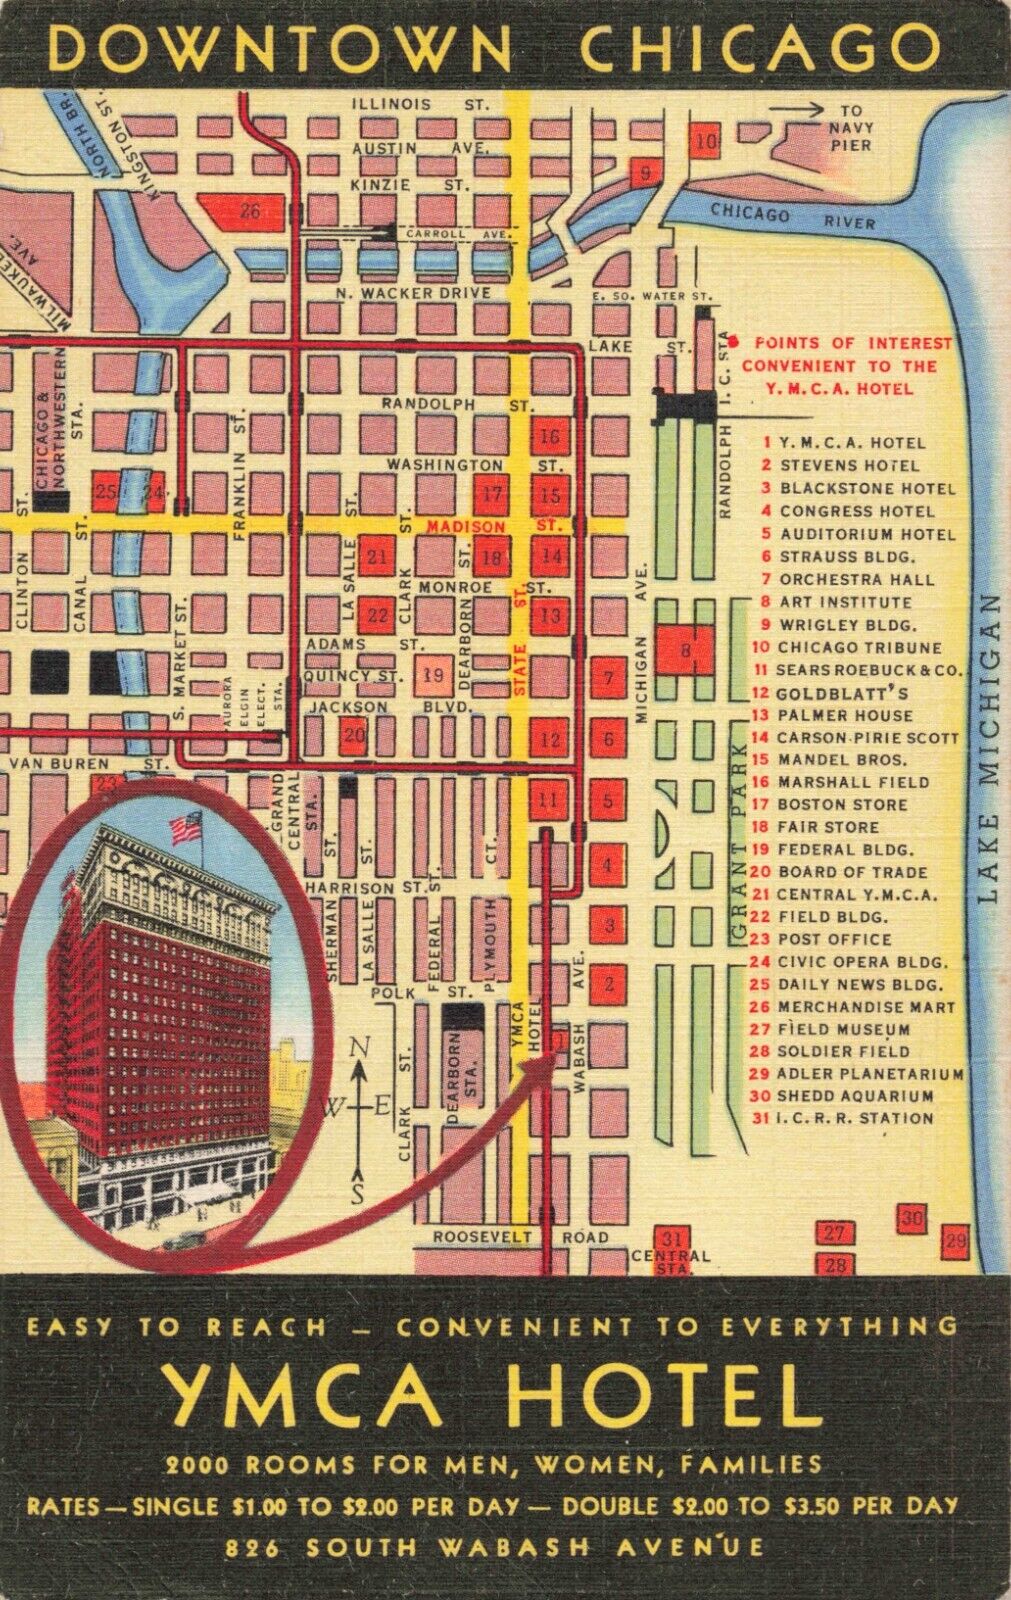 Chicago IL Illinois, YMCA Hotel Advertising, Downtown Map, Vintage Postcard